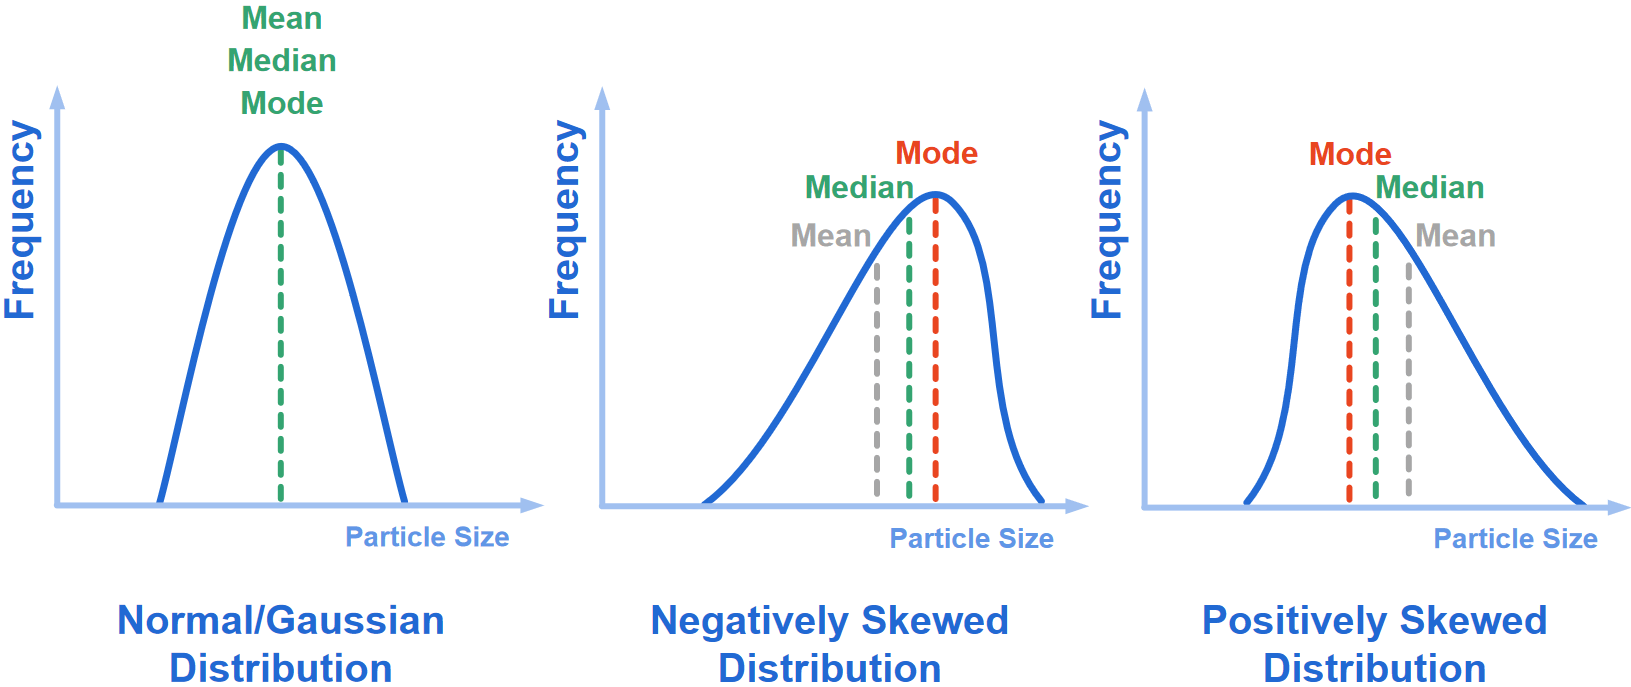 The values for mode and mean are different to the median for negatively and positively skewed distributions